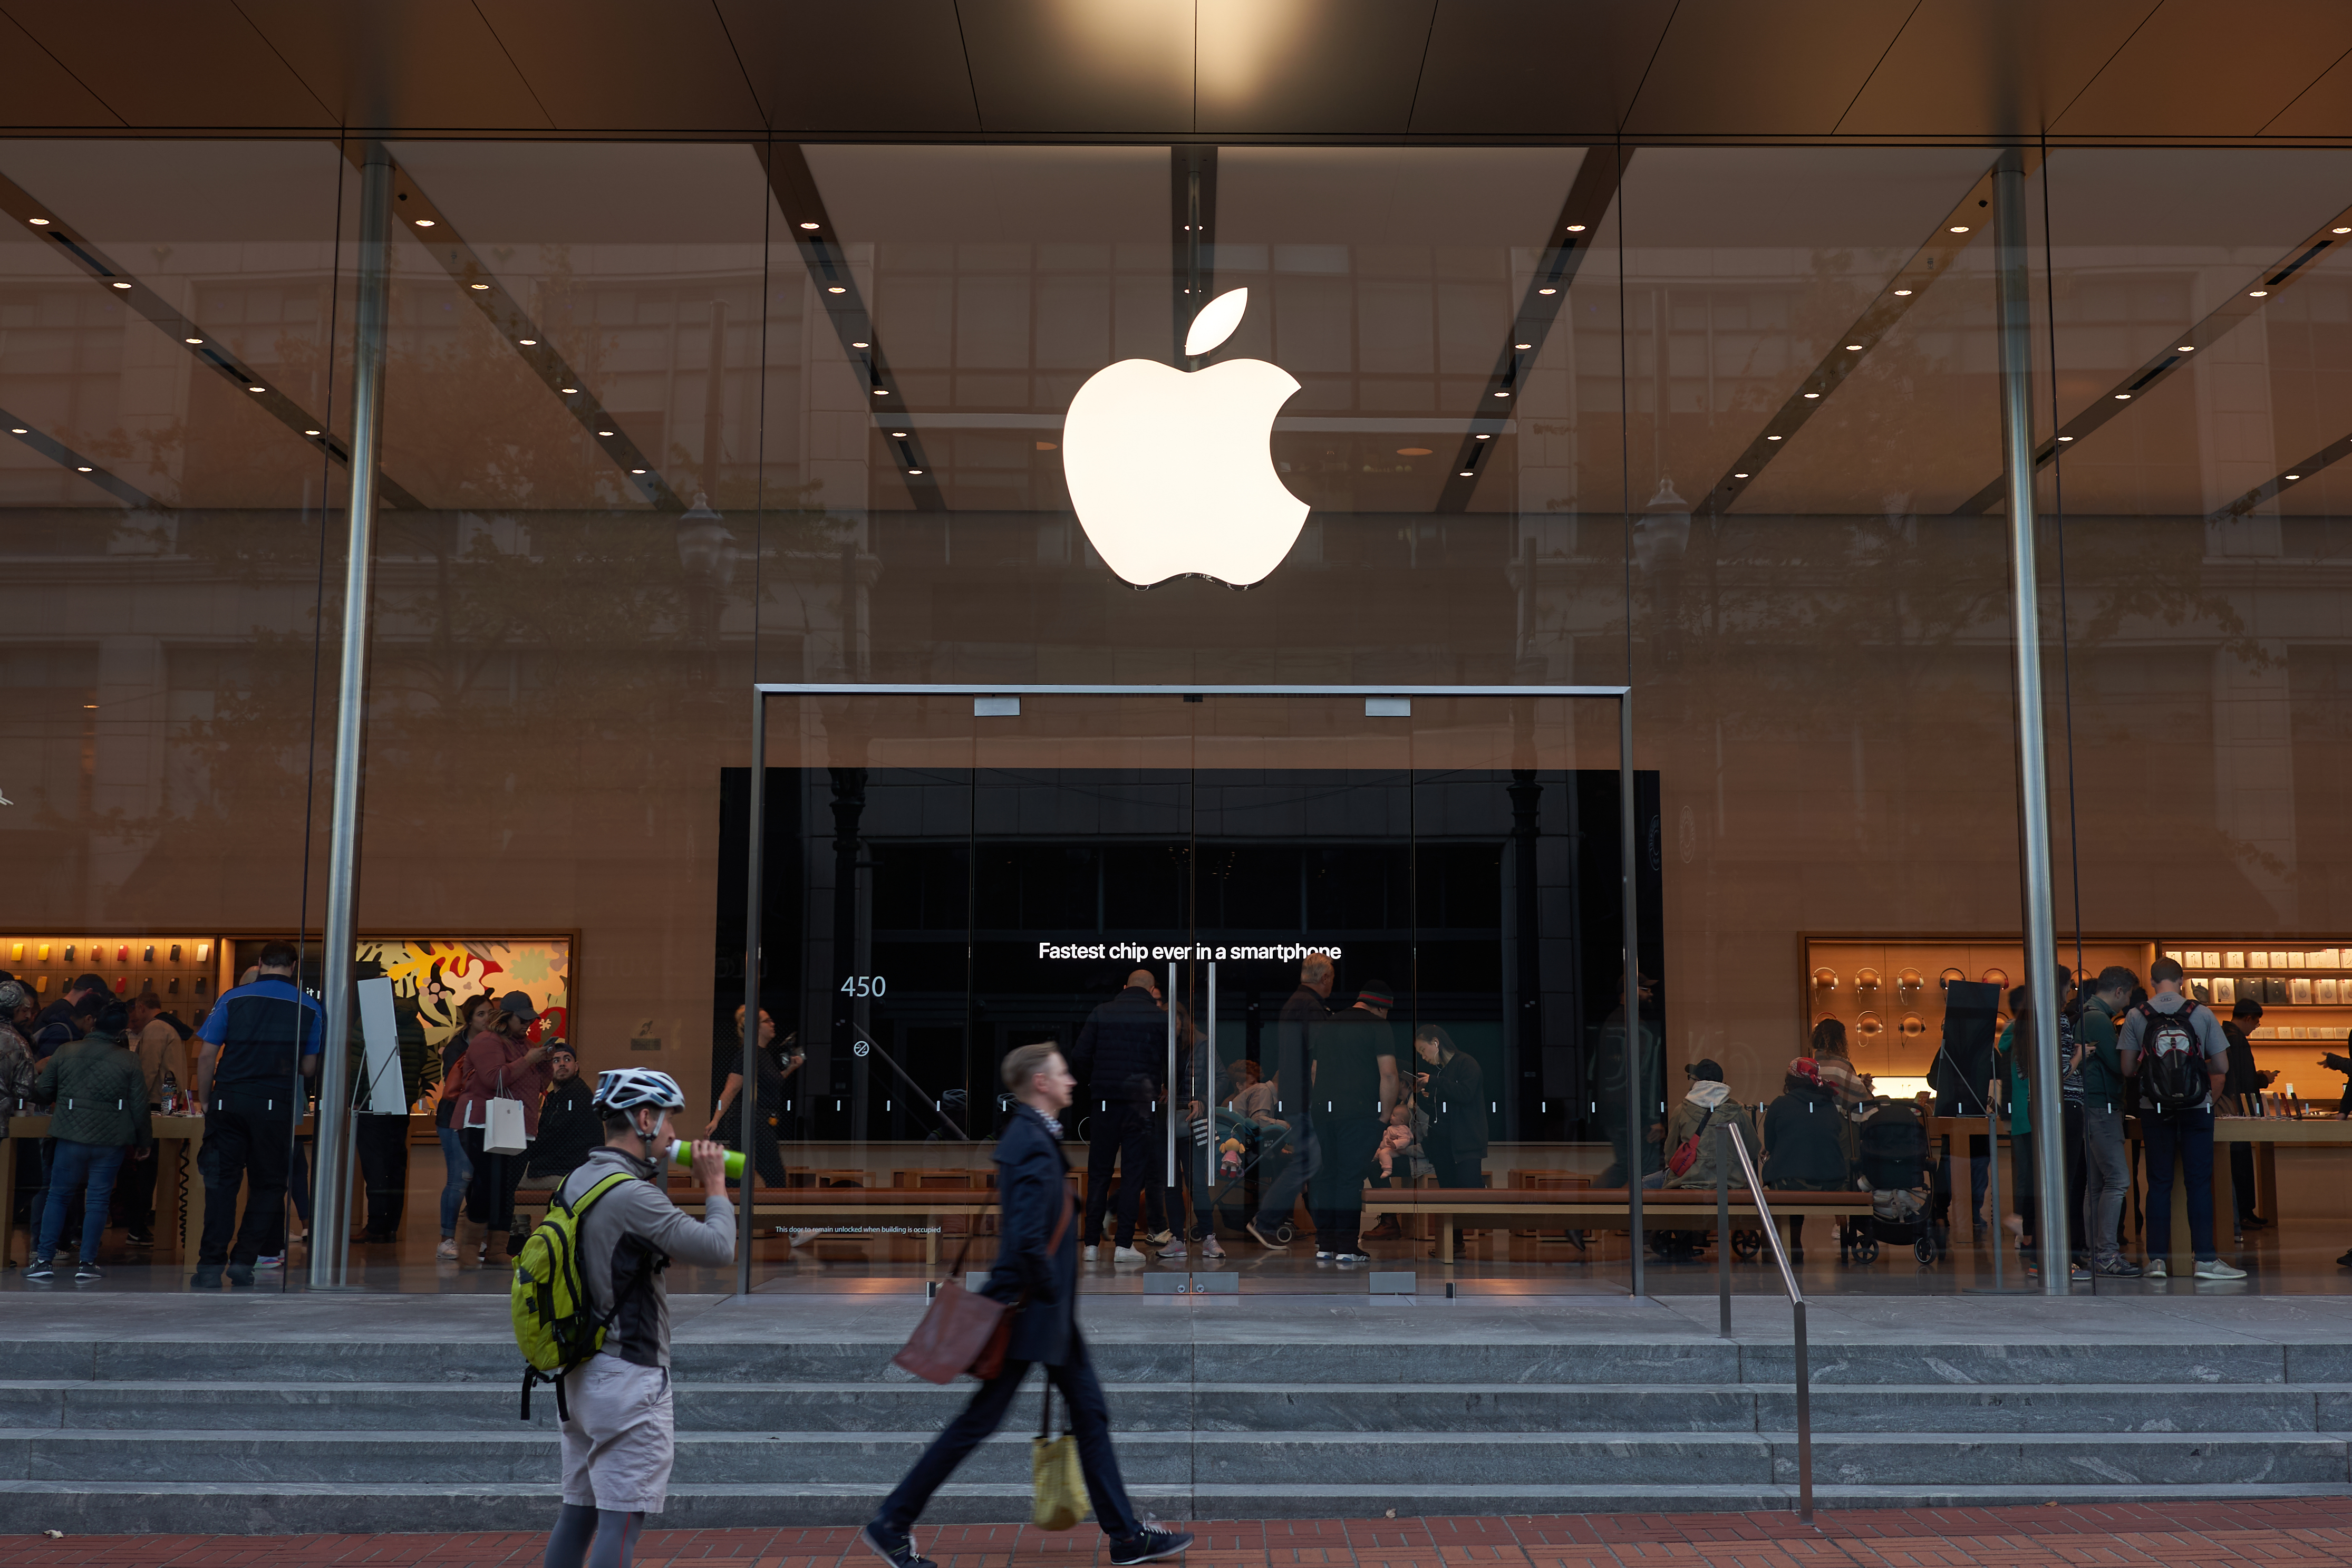 apple-employees-will-need-to-work-from-its-offices-three-times-a-week-starting-in-september-or-engadget